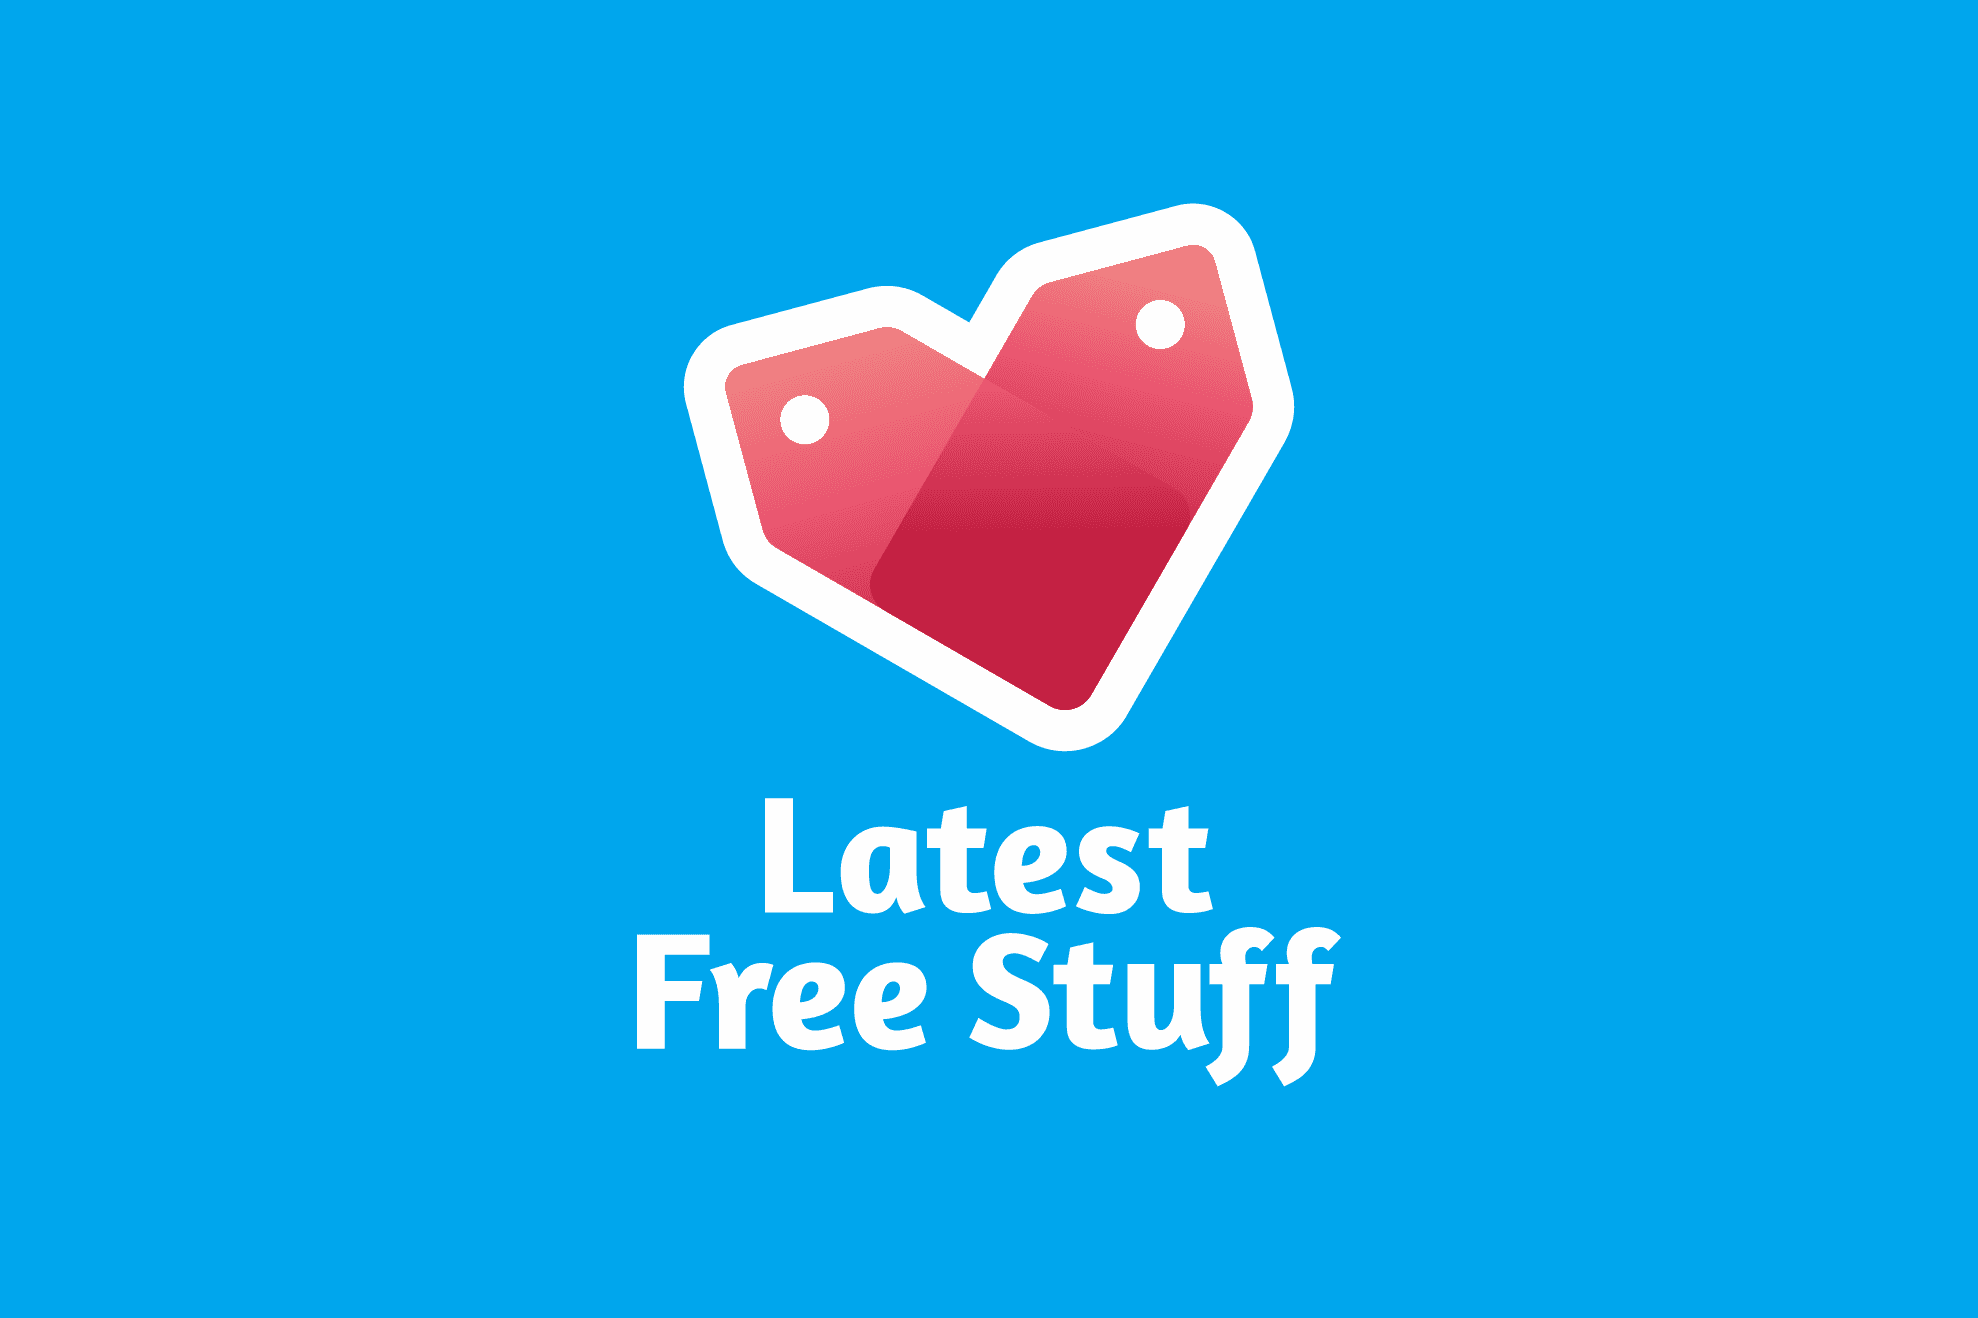 Latest Free Stuff - Who can say no to free stuff?